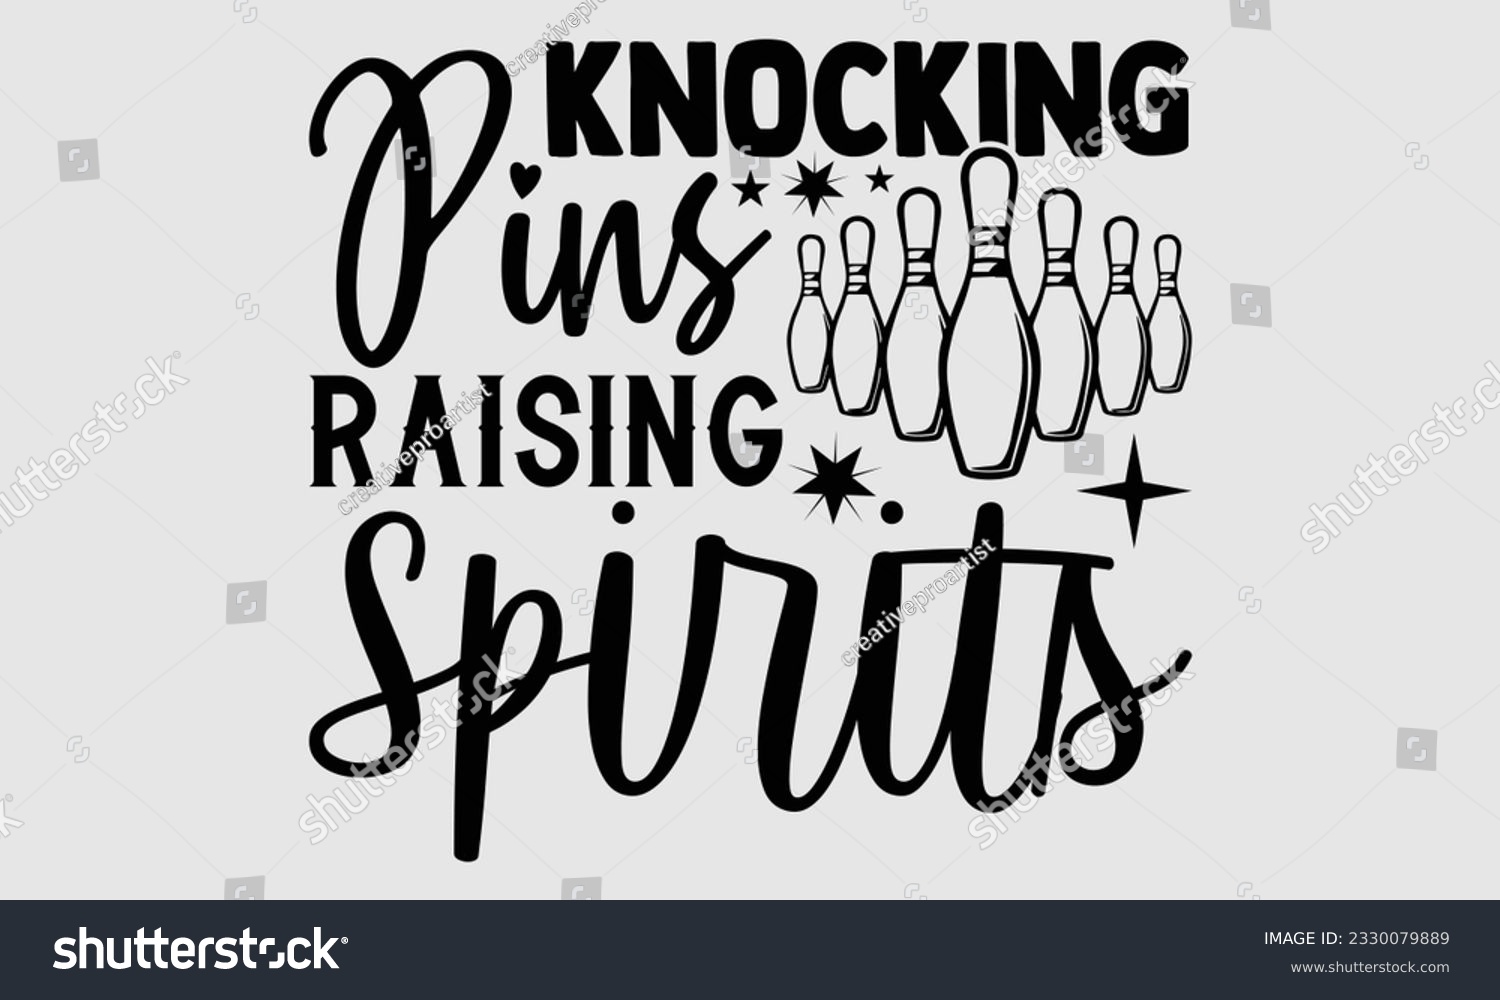 SVG of Knocking Pins Raising Spirits- Bowling t-shirt design, Handmade calligraphy vector Illustration for prints on SVG and bags, posters, greeting card template EPS svg